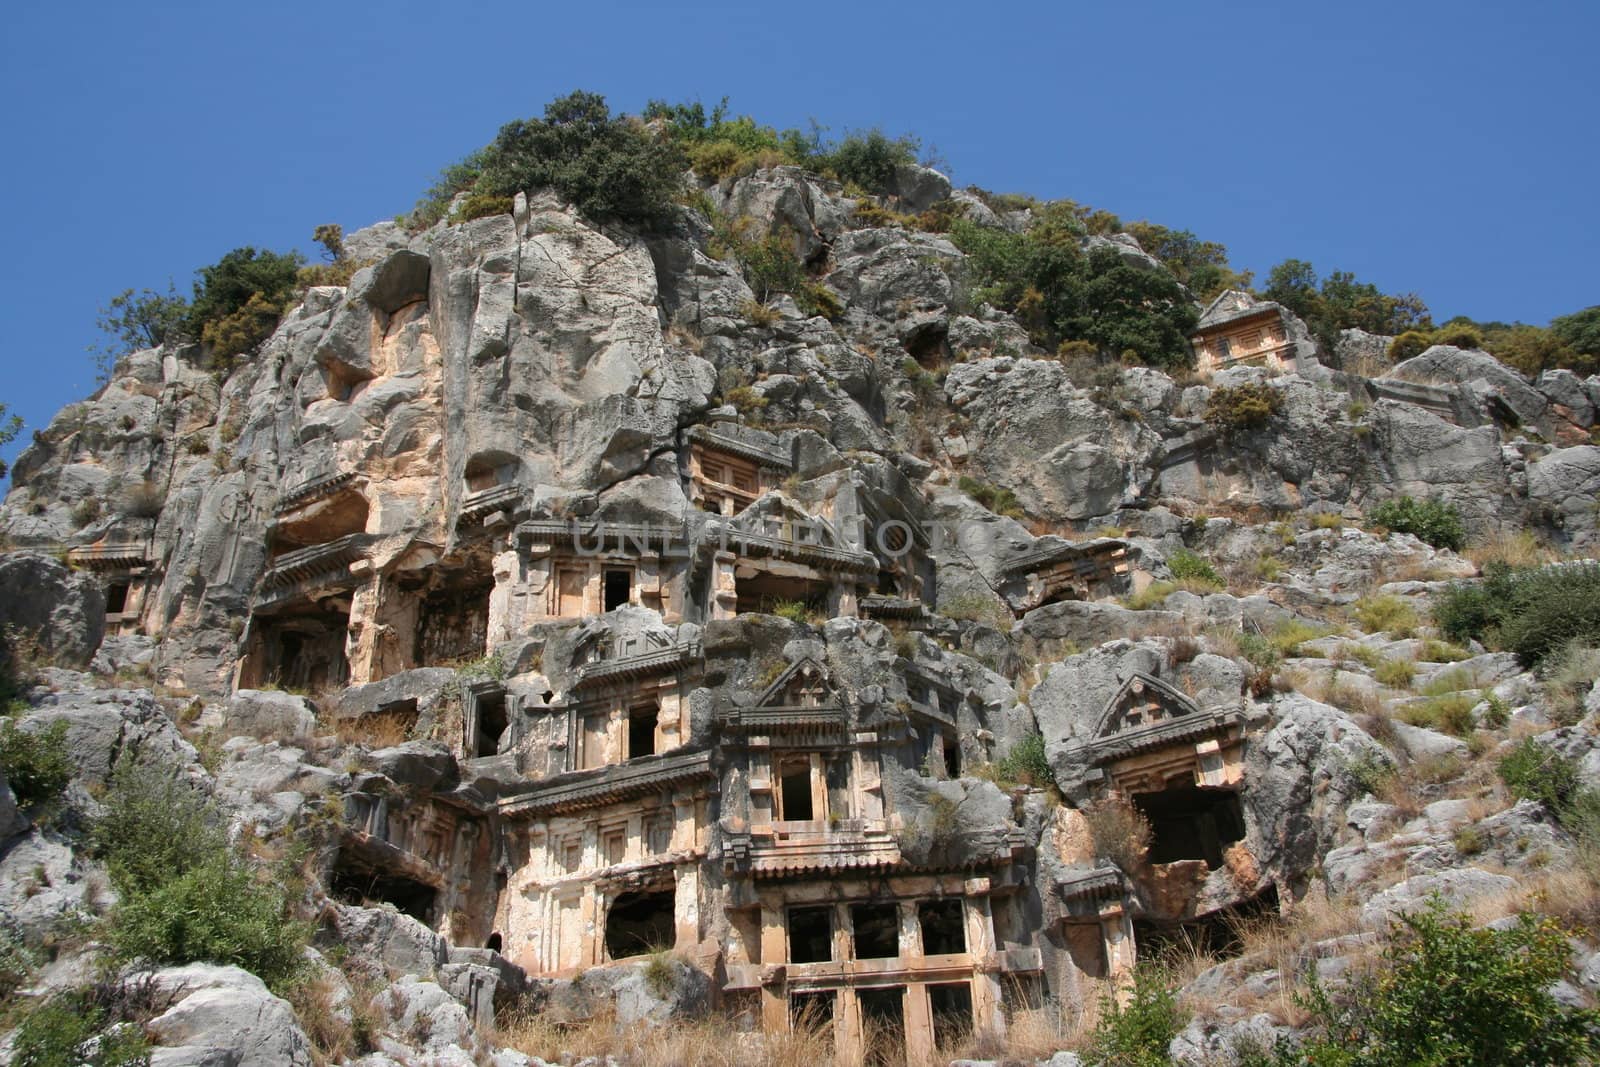  	Ancient buildings in the city of Myra